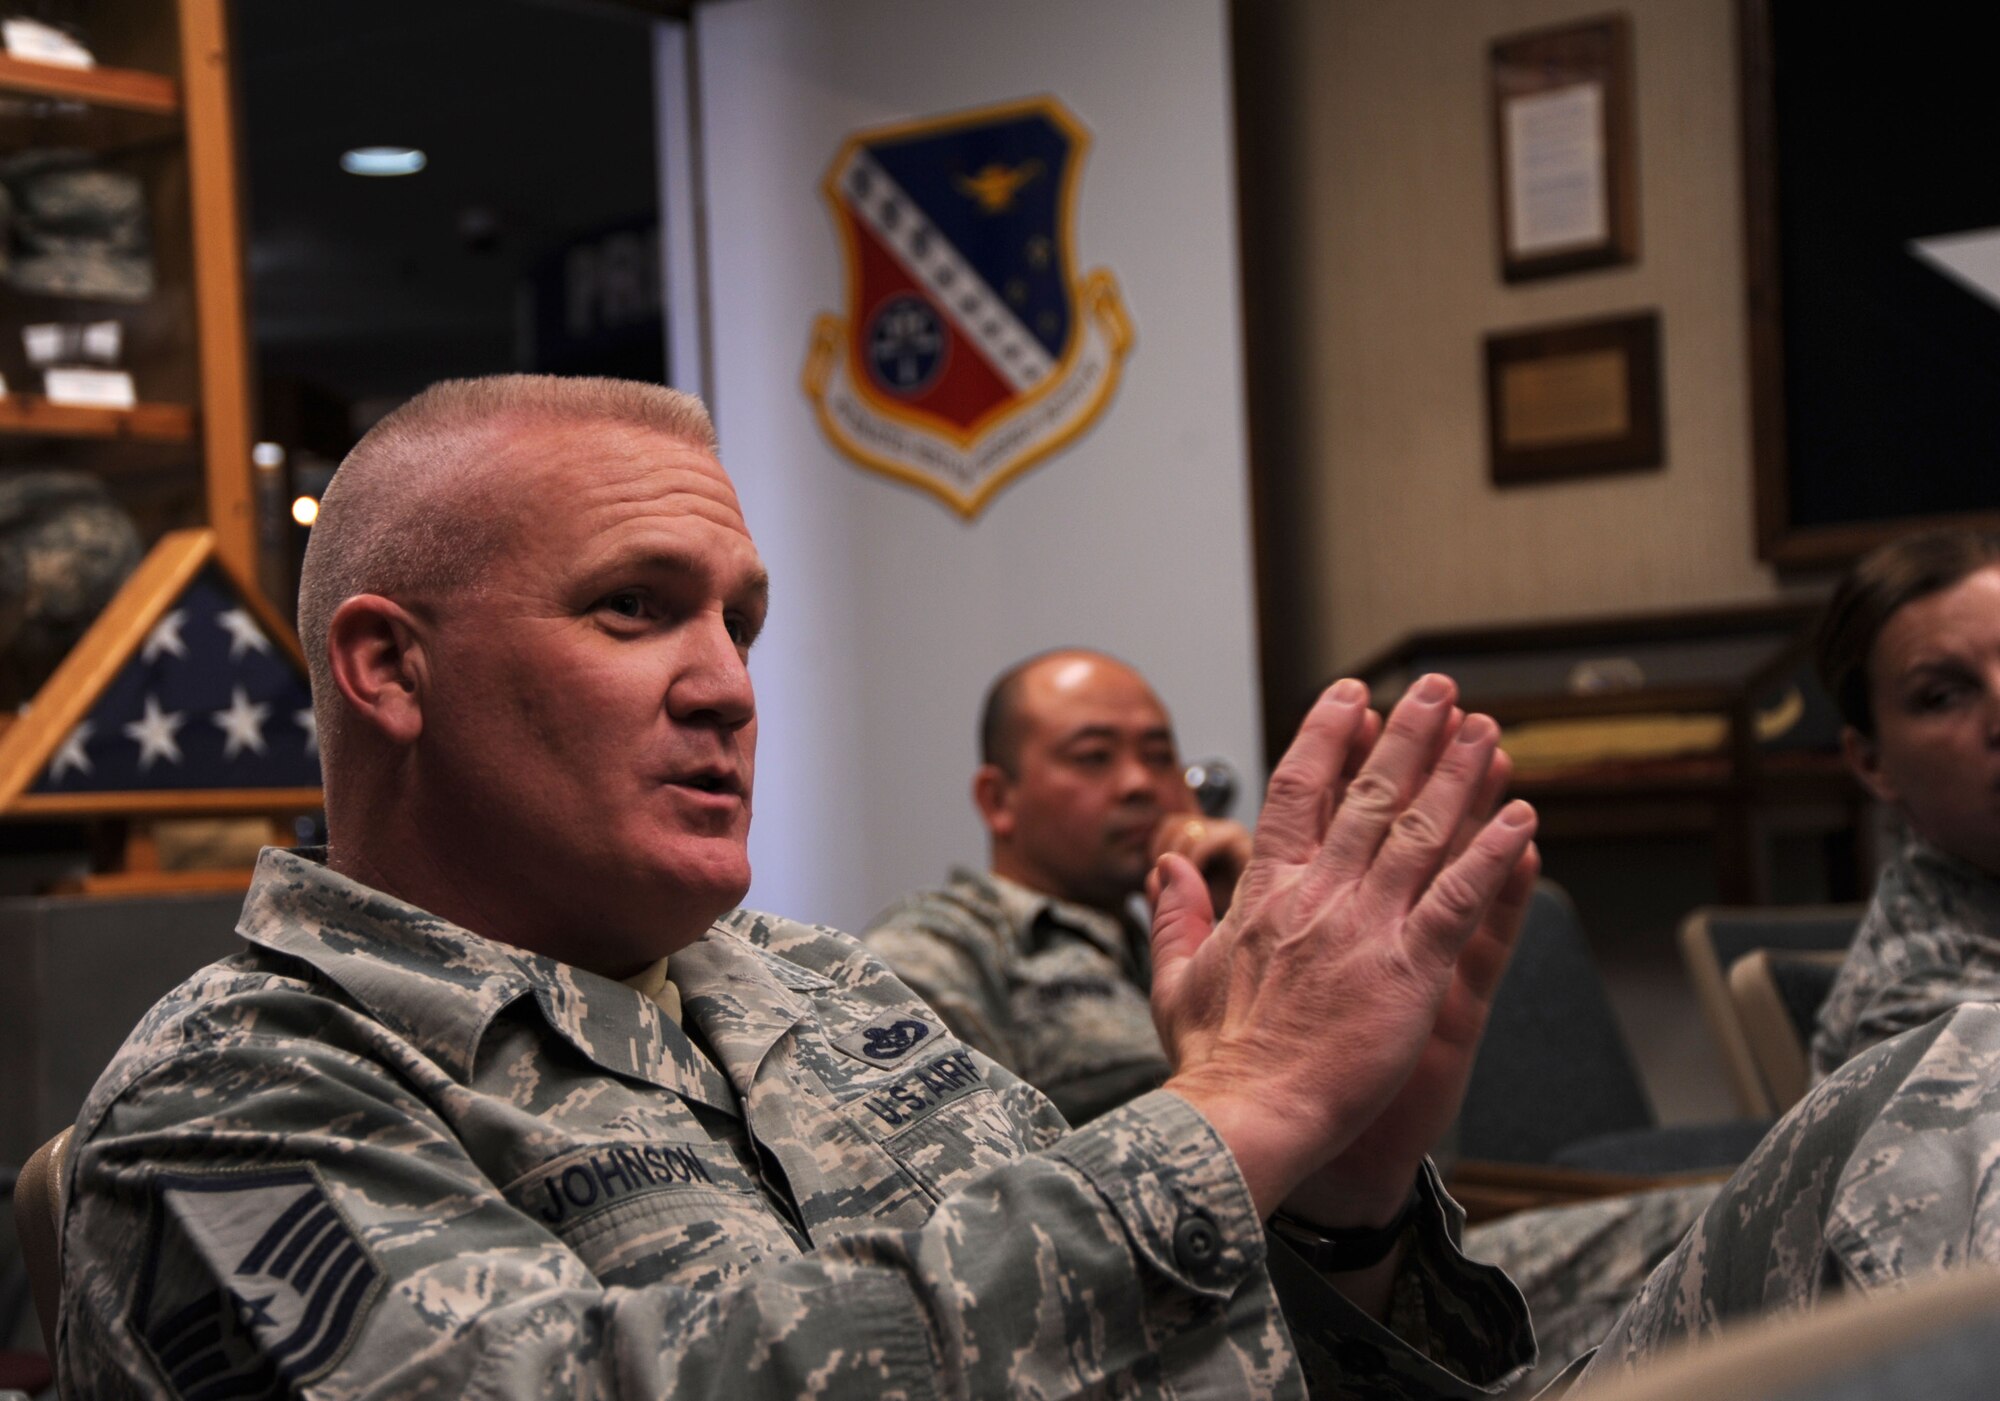 Master Sgt. Gabriel Johnson, superintendent of fire emergency services, shares his input at the Senior Non-Commissioned Officers Forum and Social at the Enlisted Heritage Hall at Maxwell-Gunter Air Force Base, Ala., Jan. 29, 2015. The forums are a venue for SNCOs to share with and inform each other on enlisted issues. One of the topics discussed during the forum was the new enlisted performance report process. (U.S. Air Force Base photo by Airman 1st Class Alexa Culbert/Cleared)